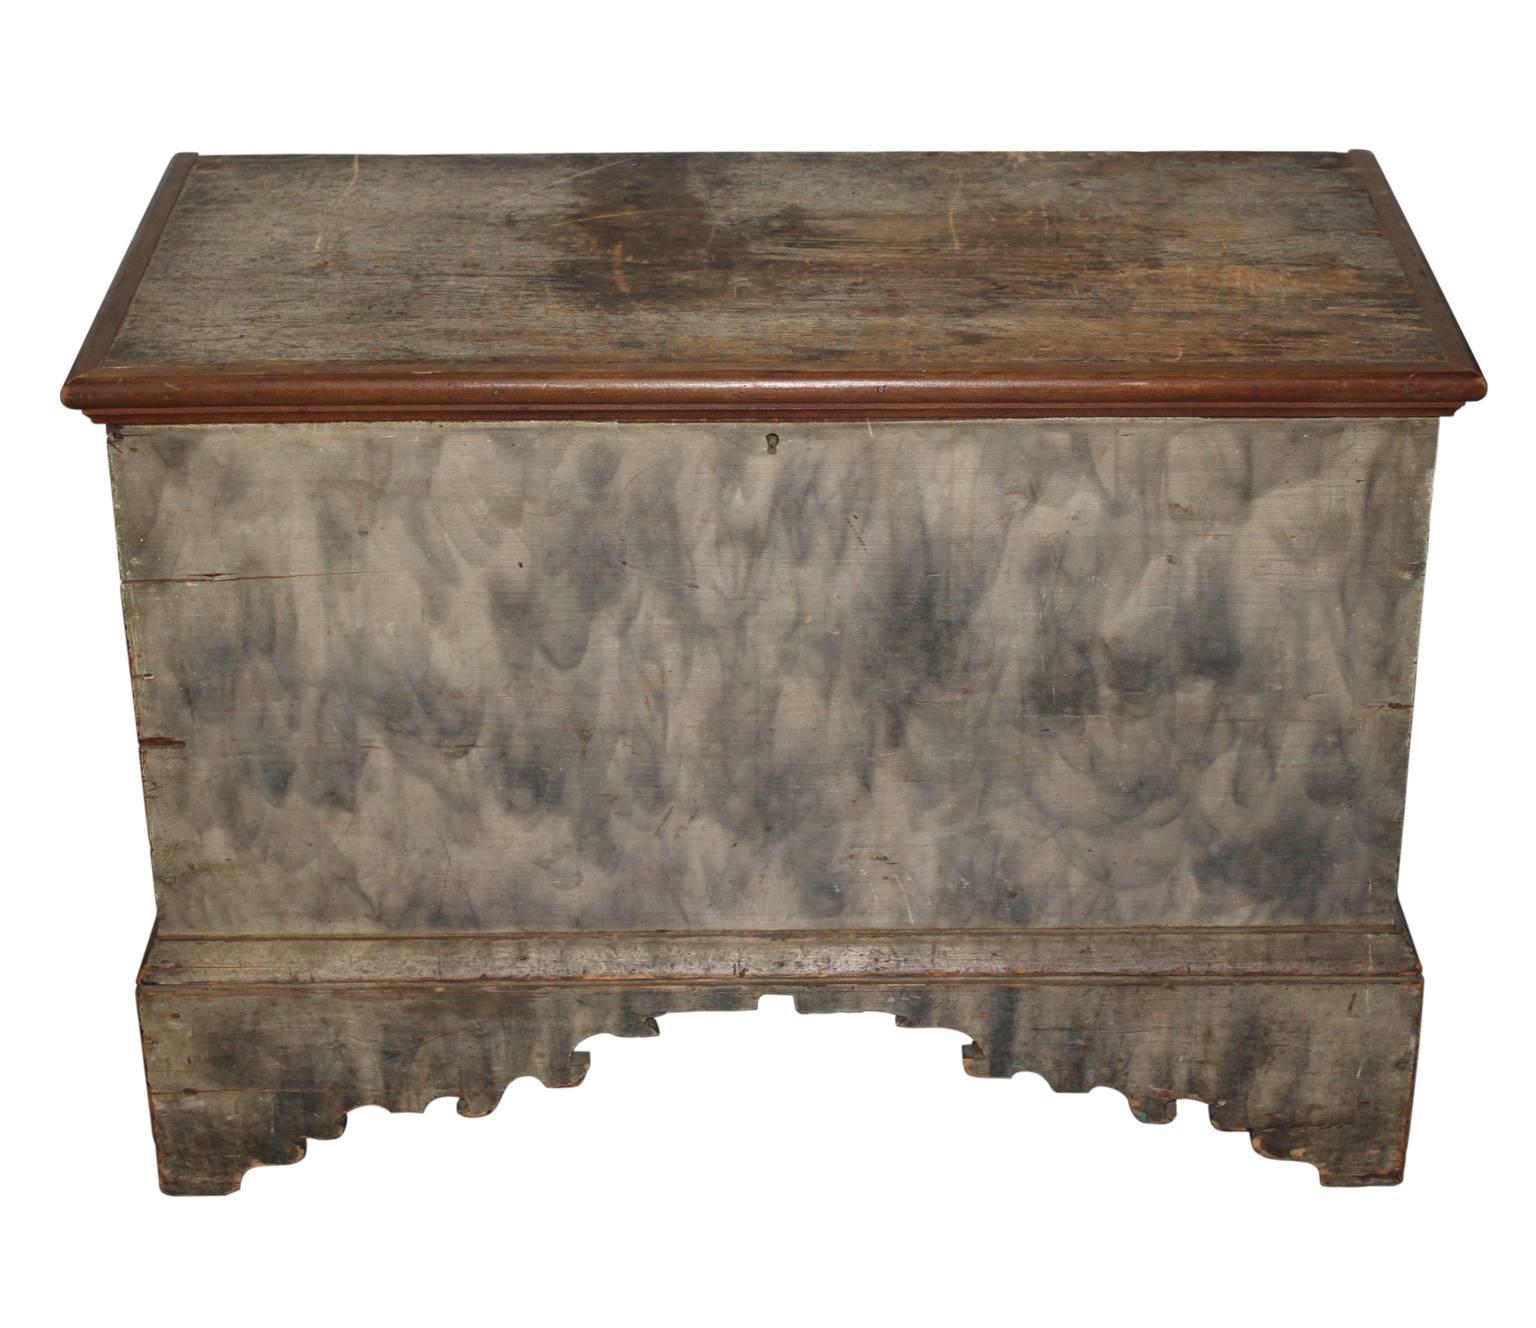 A beautifully smoke painted grey blanket chest, with decorative carving in front legs. On the inside, there are two smaller storage compartments, one cubby with a drawer underneath. There is a bit of space underneath the drawer as well. The hinges